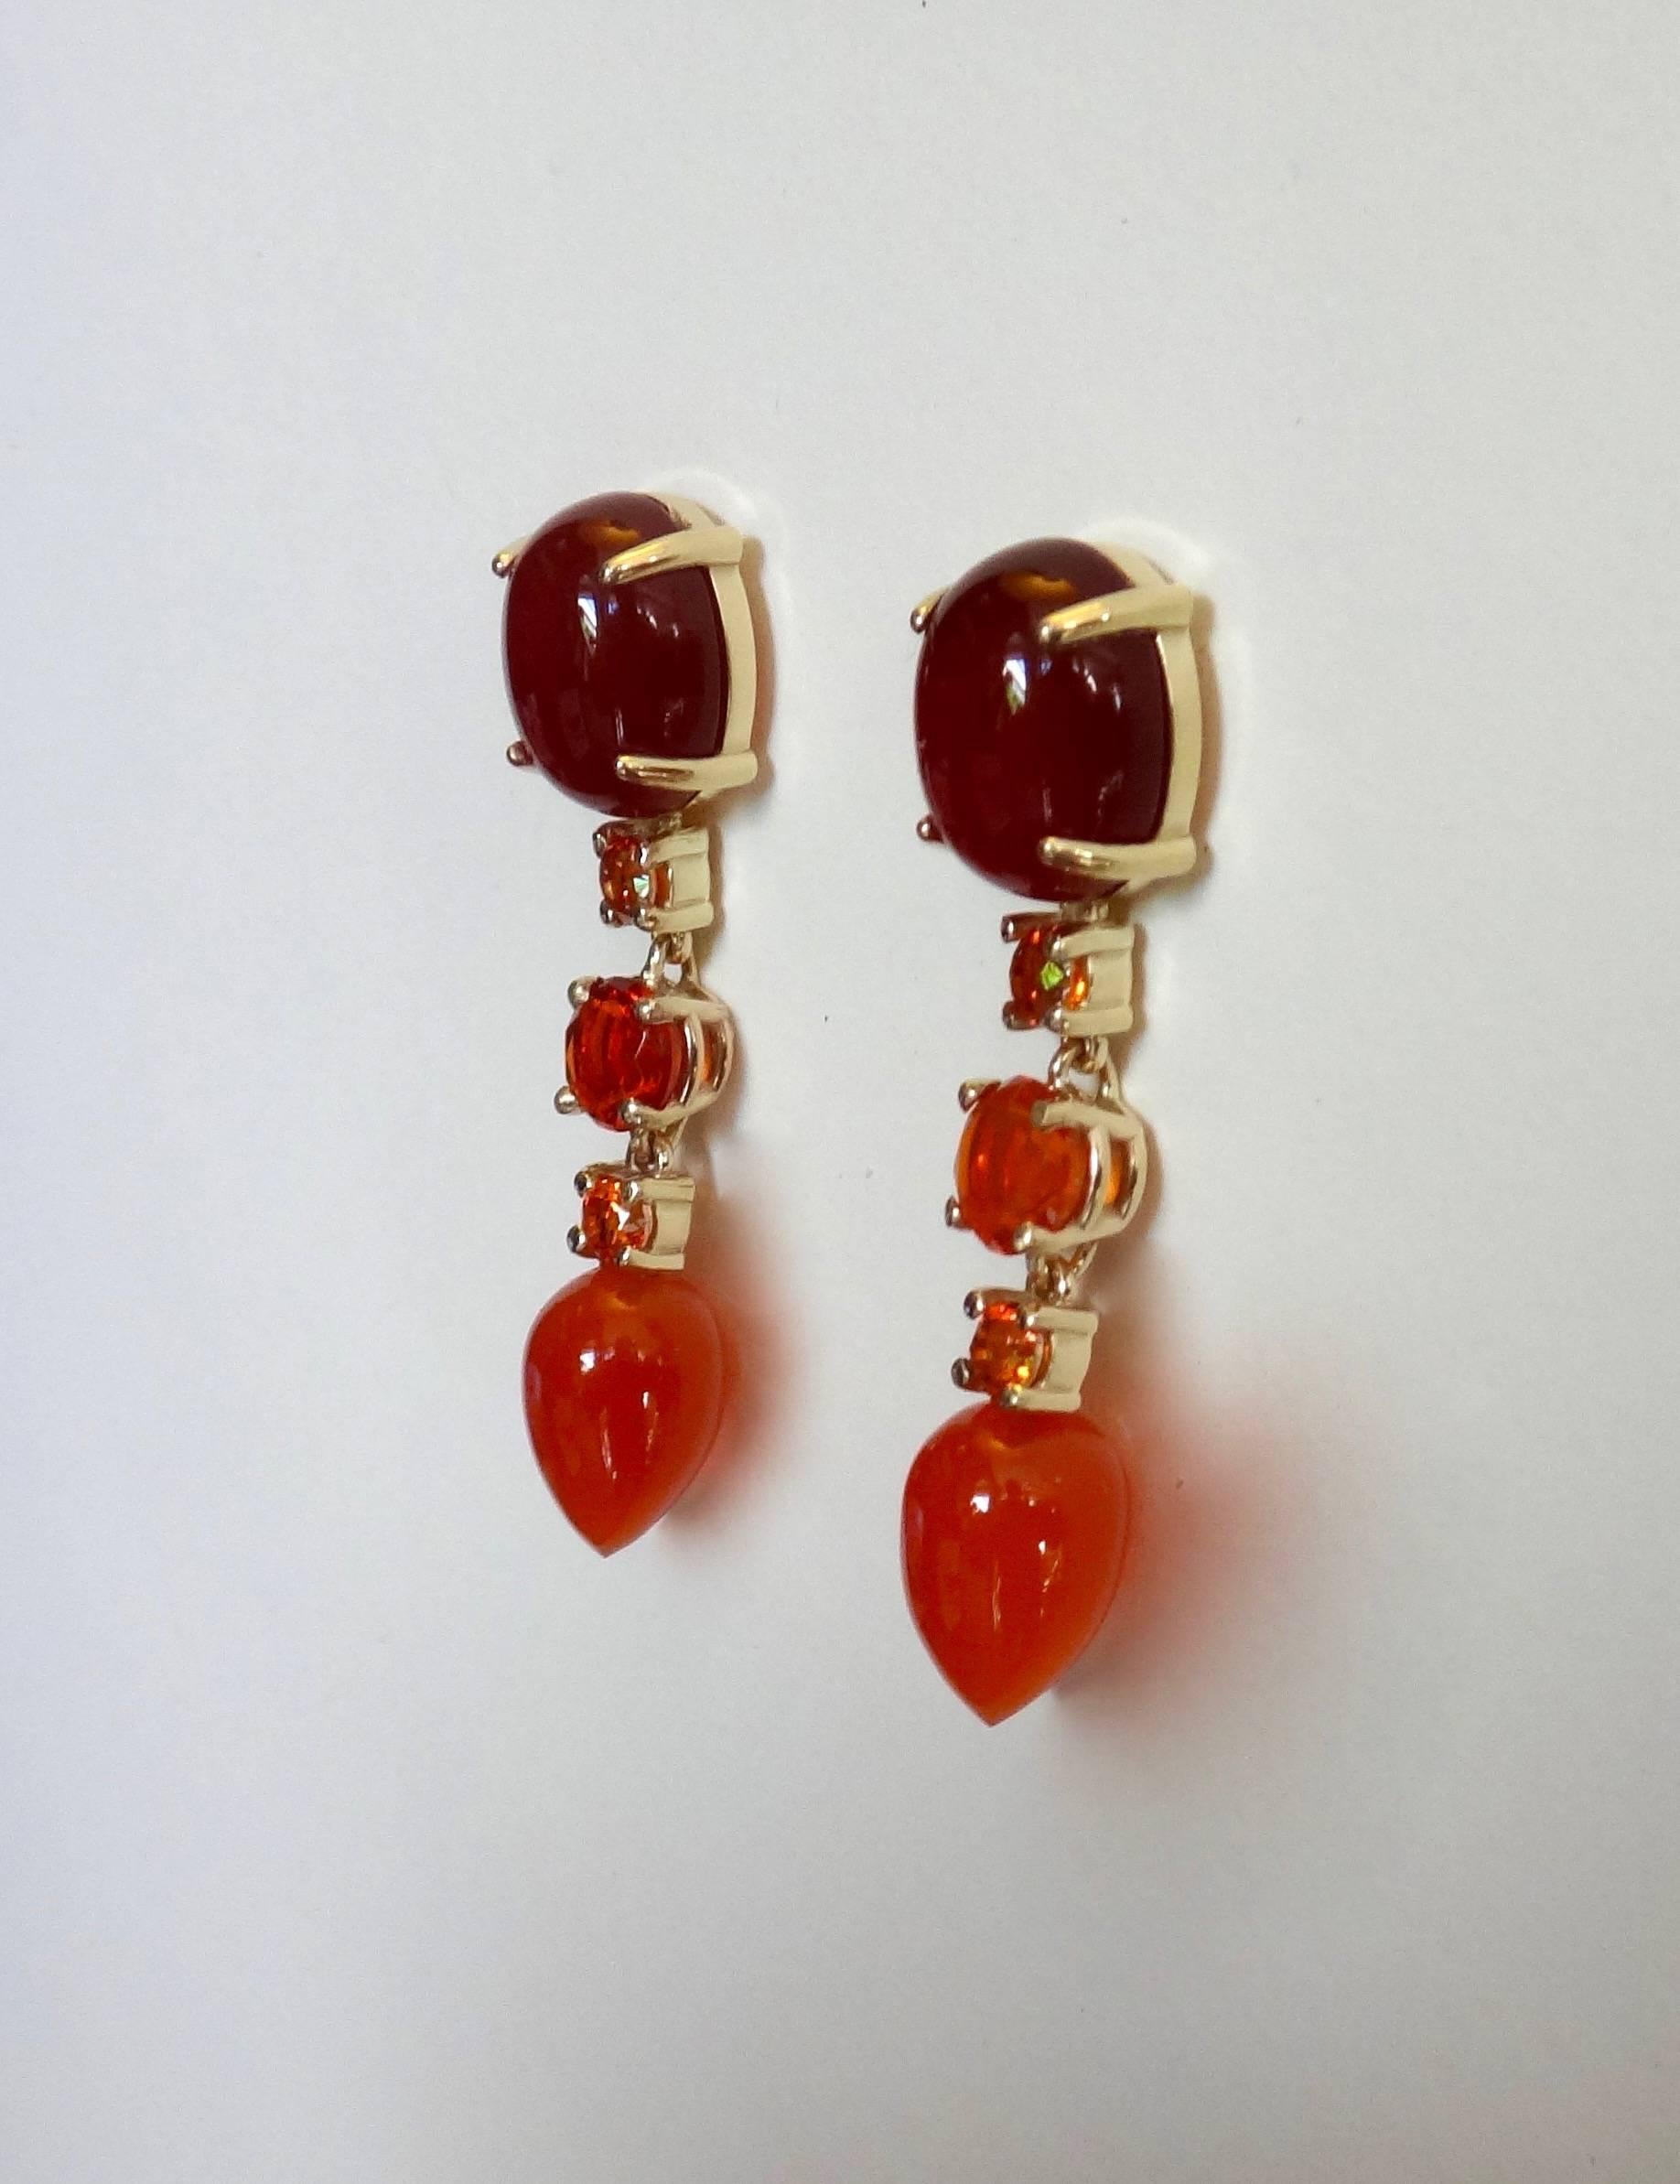 Cabochon cut carnelian, faceted orange topaz, orange Mexican fire opal and a new shape of briolette called an 